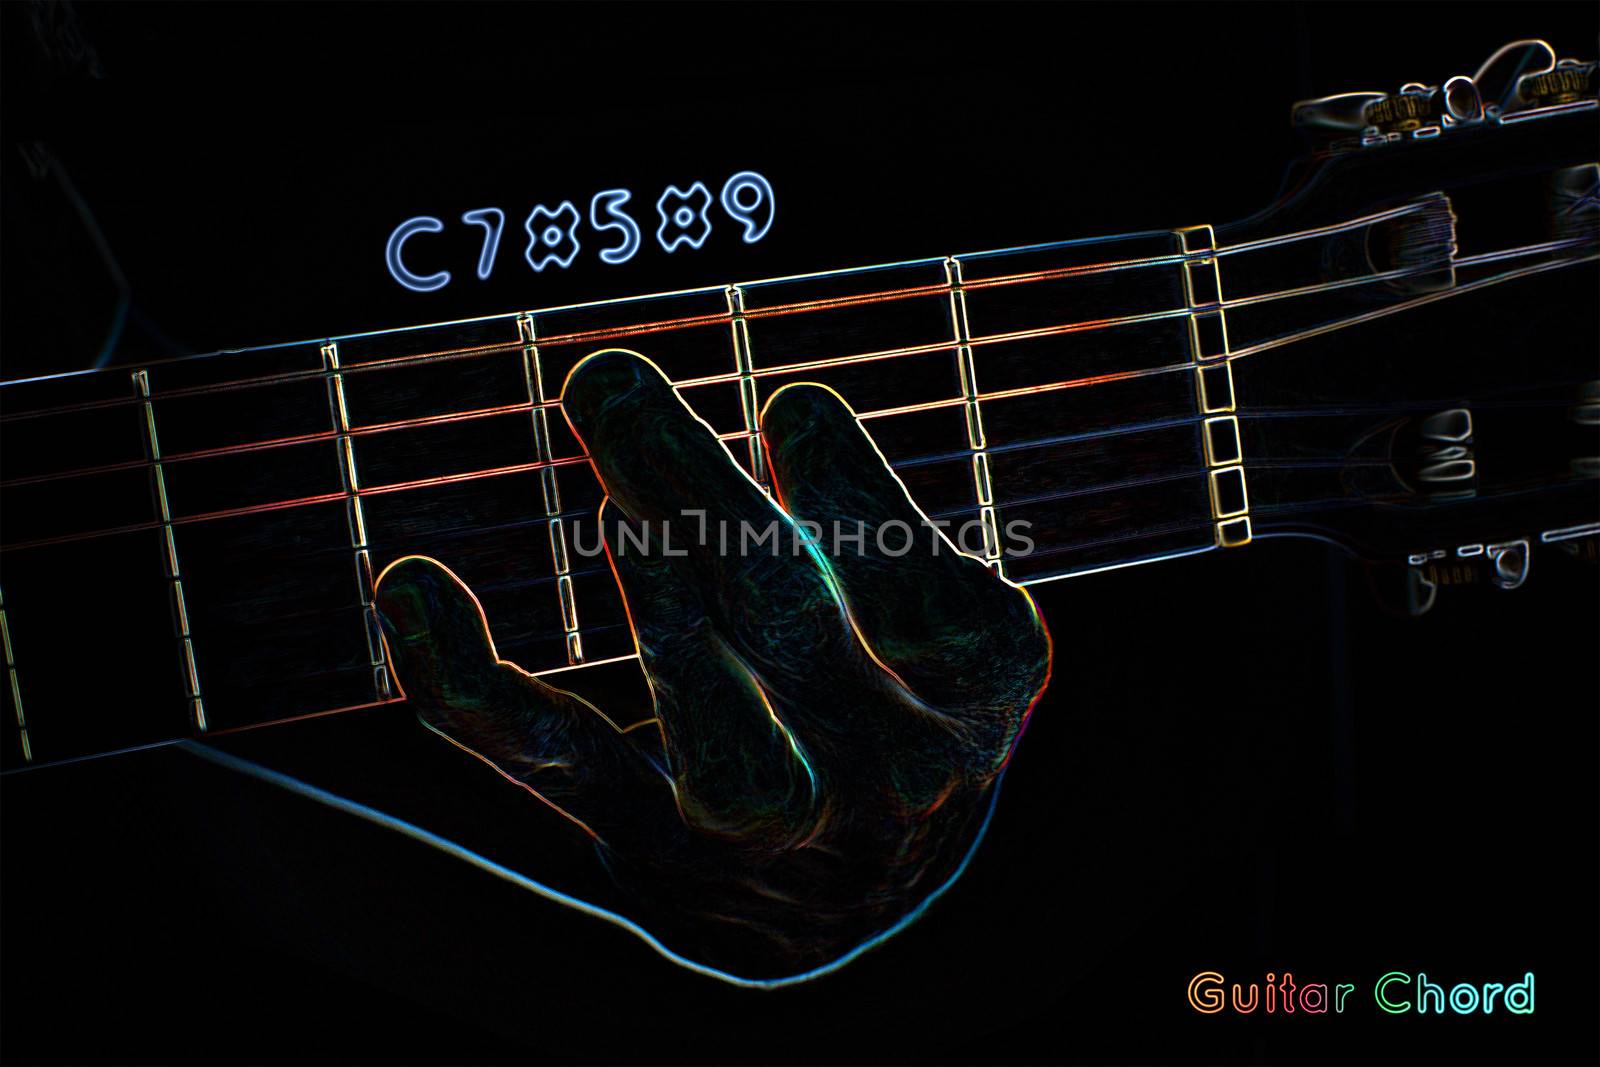 Guitar chord on a dark background, stylized illustration of an X-ray. C7#5#9 chord